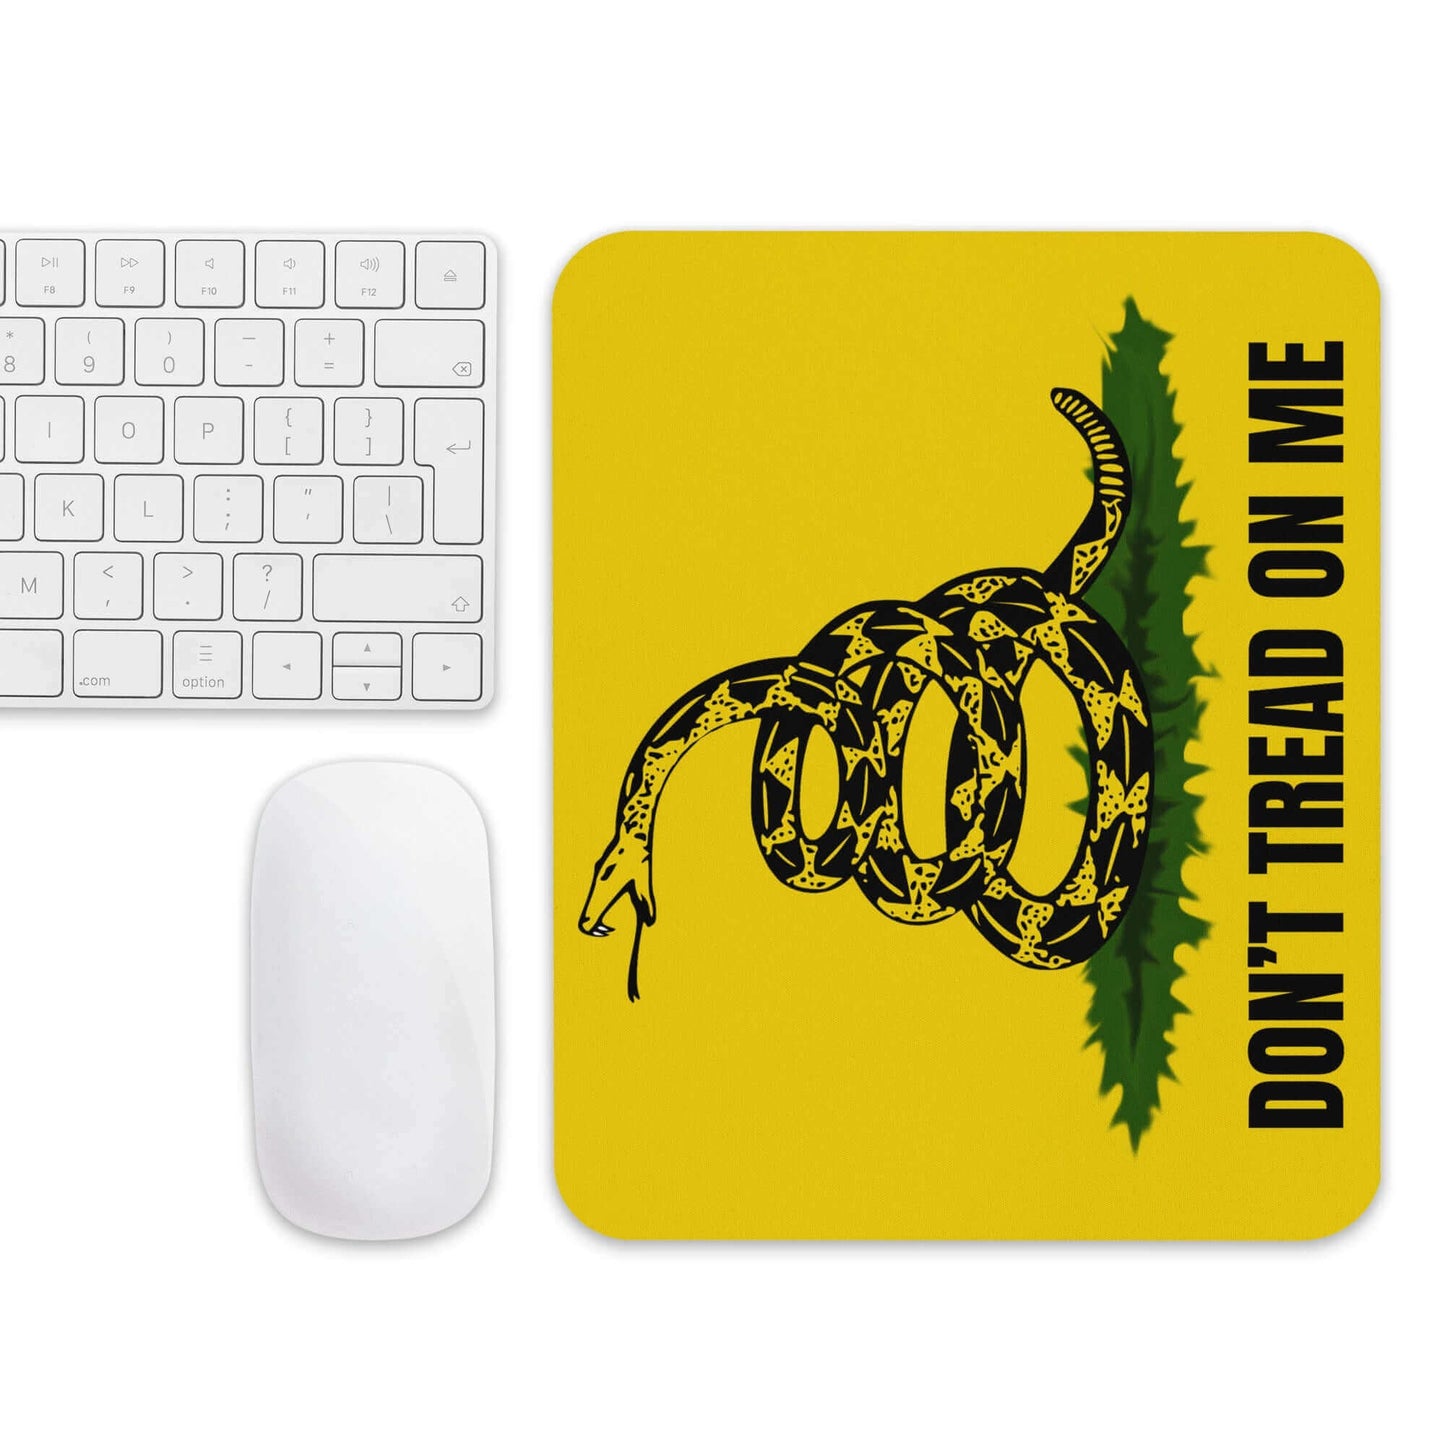 Don't tread on me - Mouse pad 1776 2nd amendment agorism constitution dont tread on me freedom gadsden libertarian liberty liberty snake tea party voluntaryism